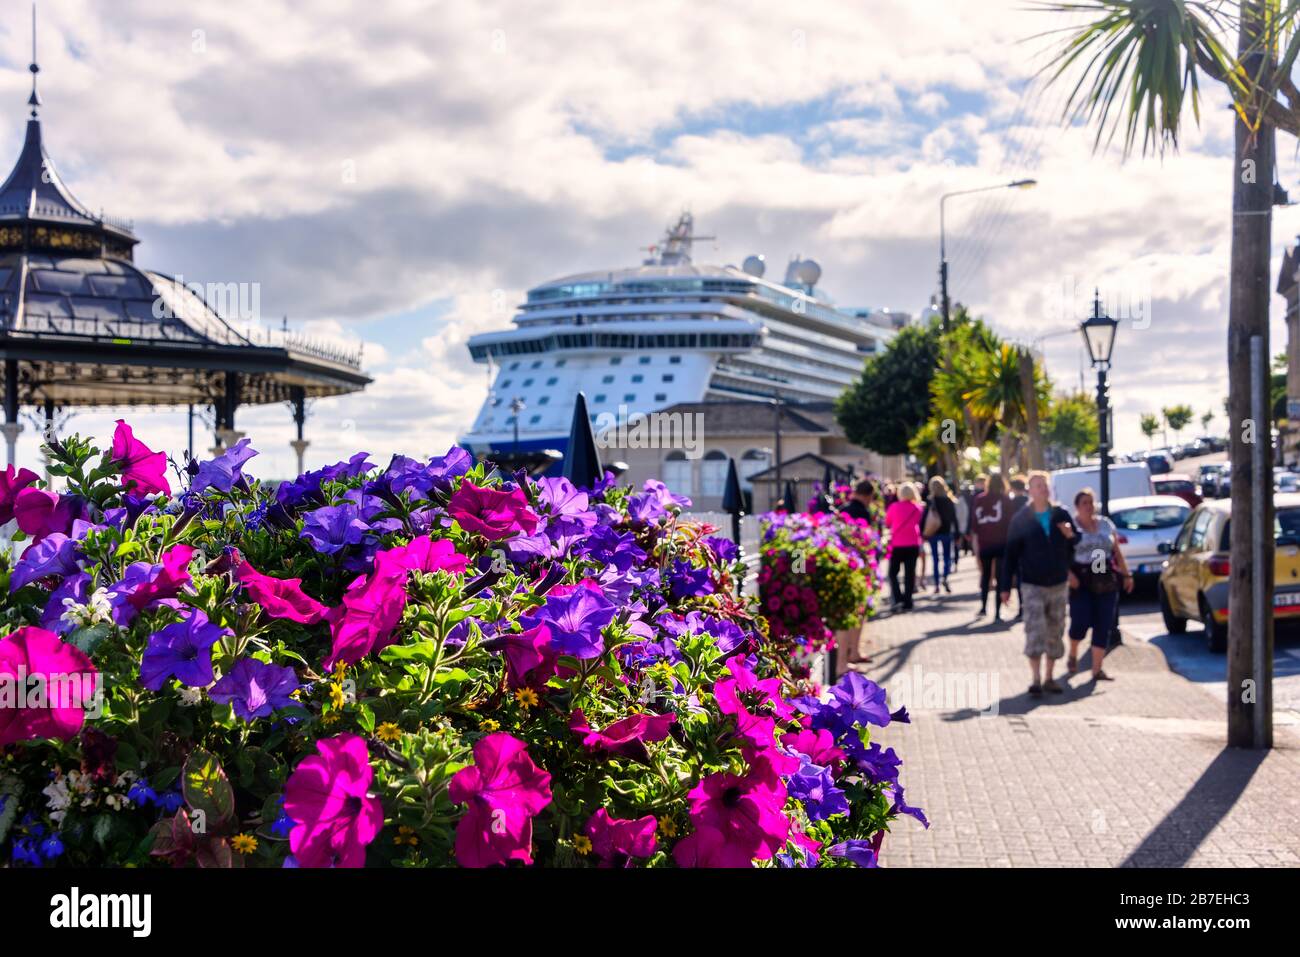 Cork, Ireland - August 7, 2018:  The Royal Princess anchored in the Port of Cobh, in Cork County, Ireland as part of a British Isle tour. Stock Photo